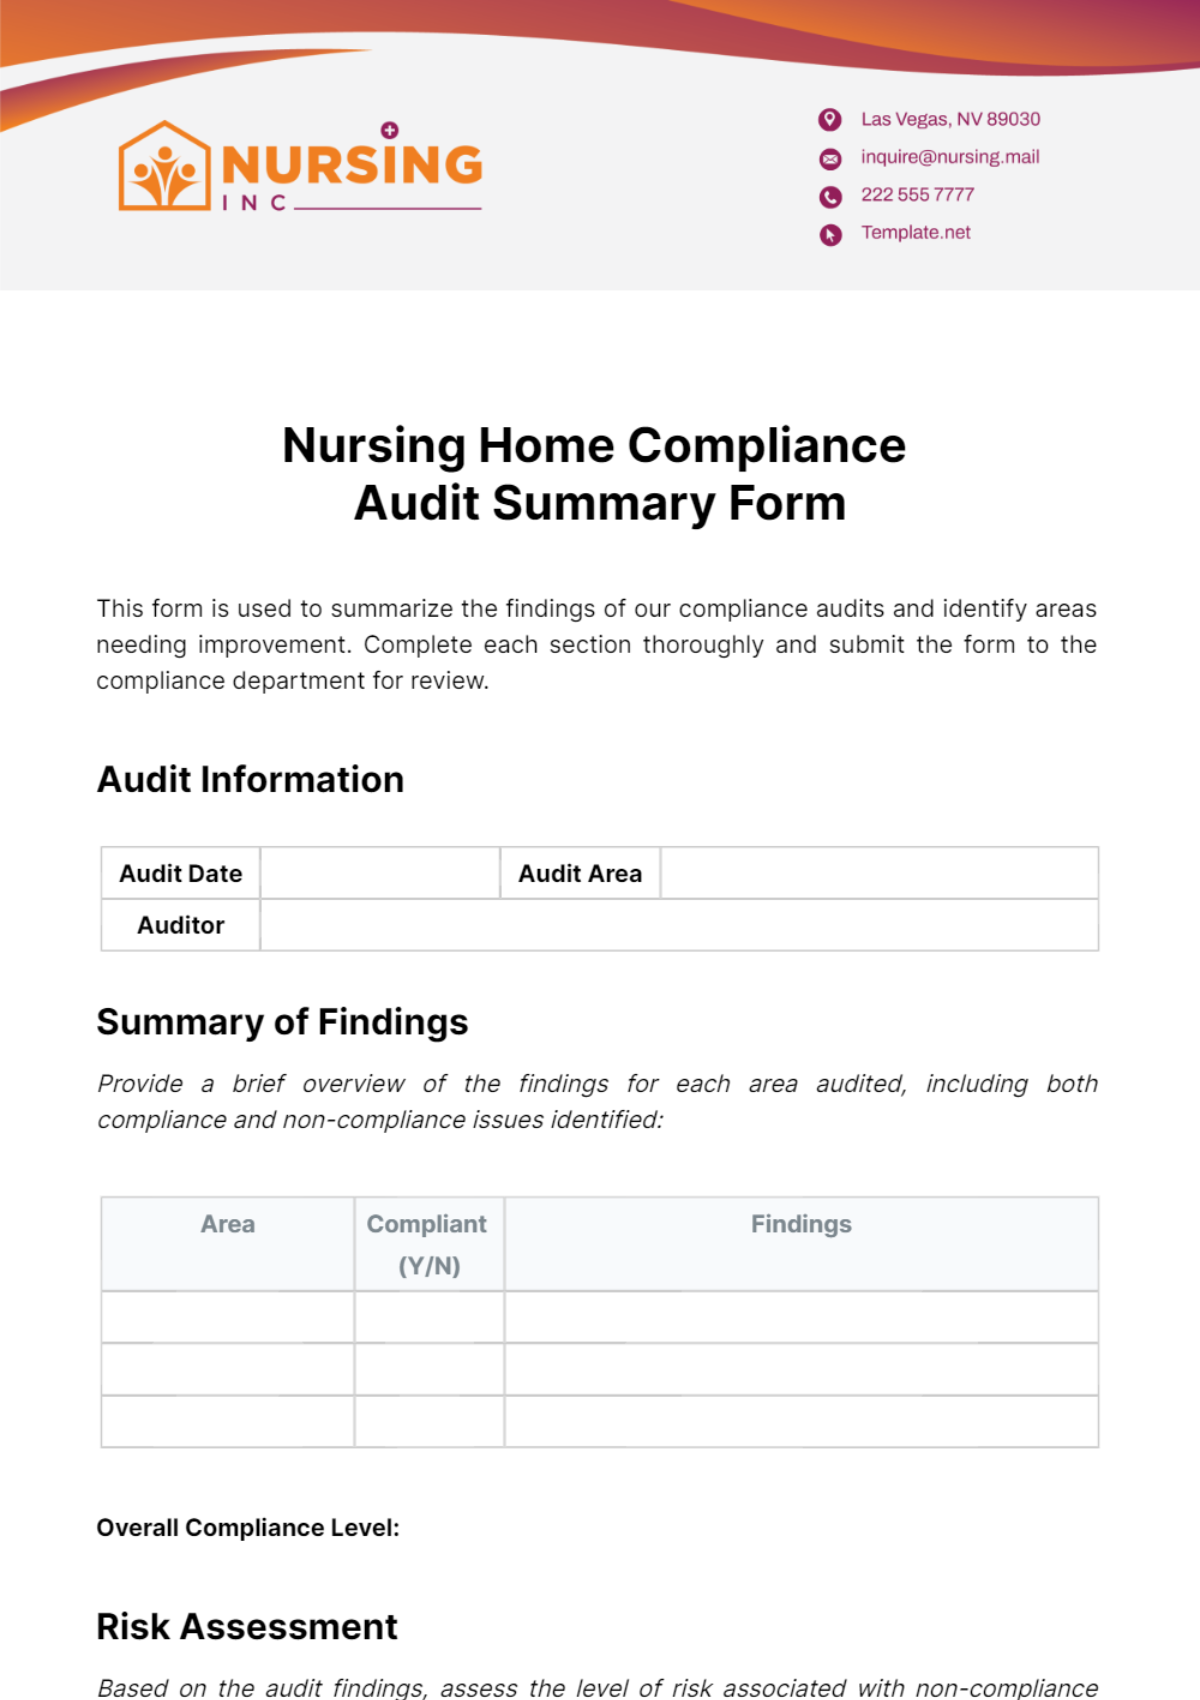 Free Nursing Home Compliance Audit Summary Form Template